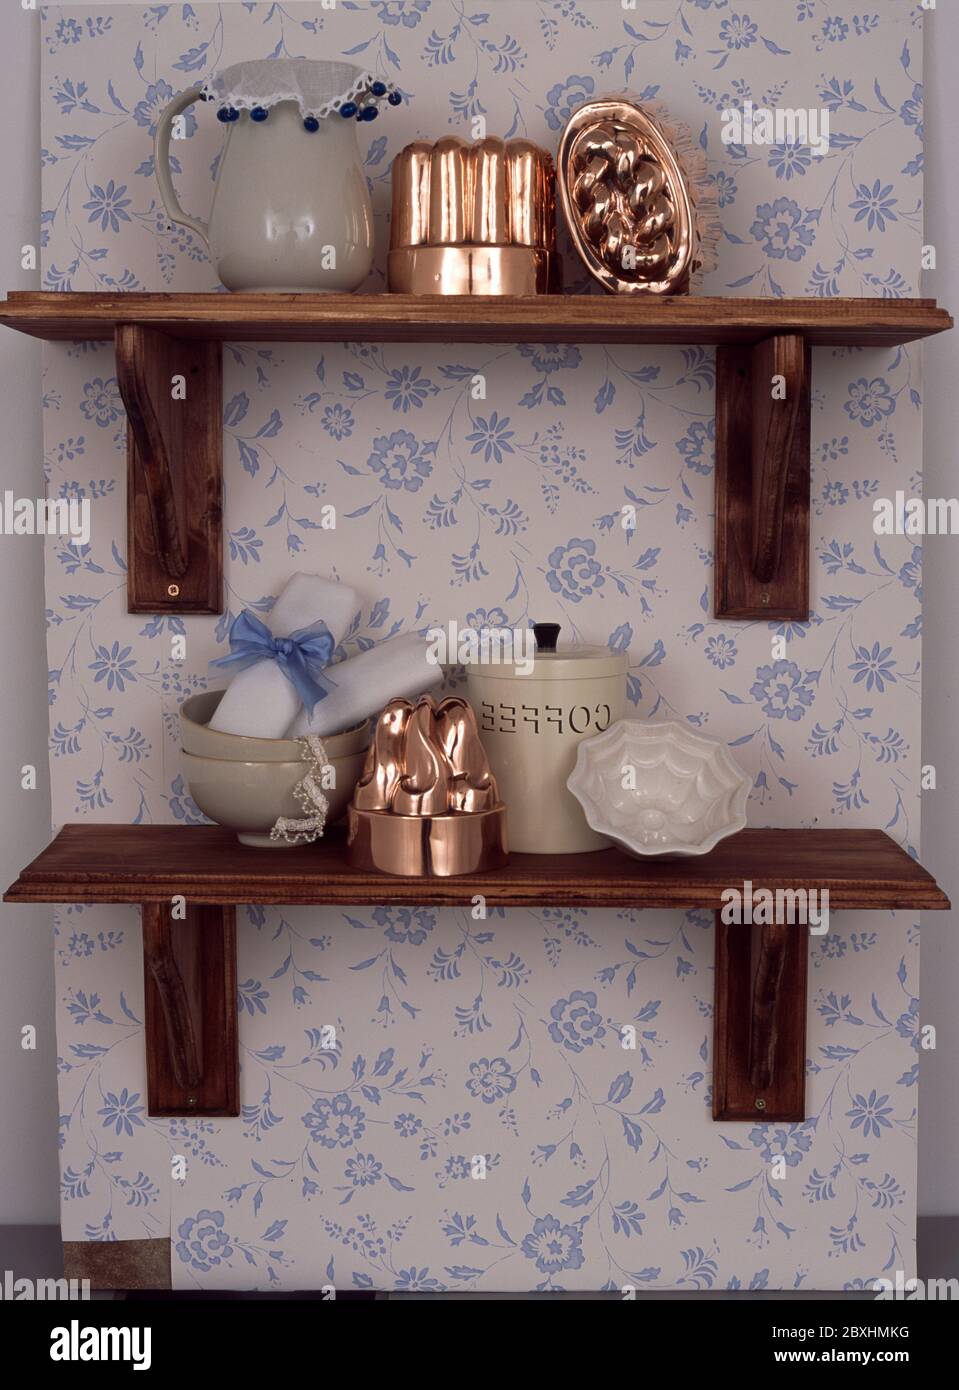 Wall hung shelves displaying kitchen objects Stock Photo